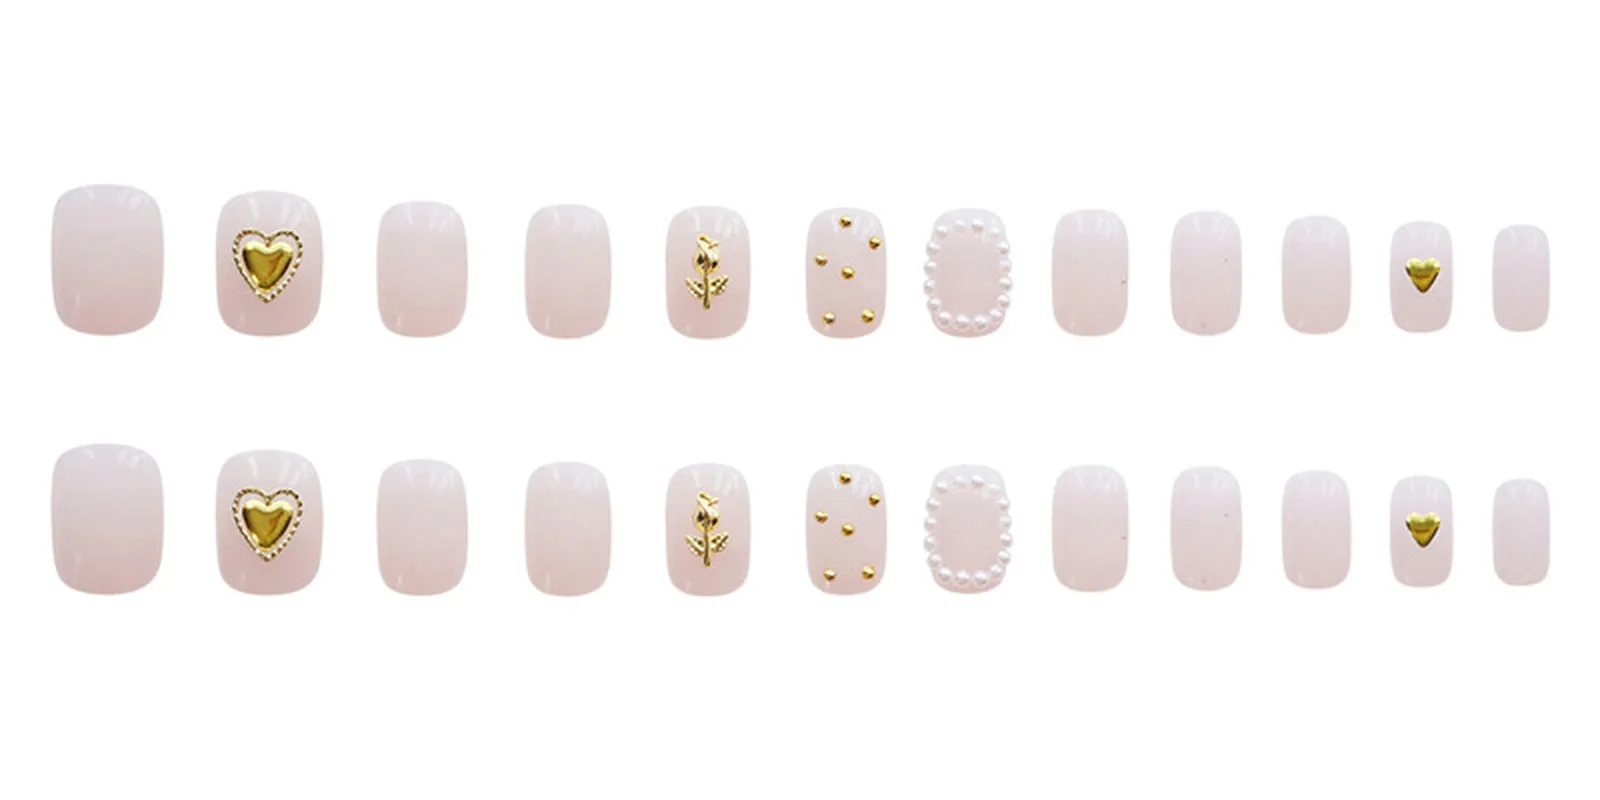 24PCS Cute Fashionable Pink Heart Pattern Wearable Fake Nails Press on Short Oval Head Lady Full Cover Artificial Nails images - 6